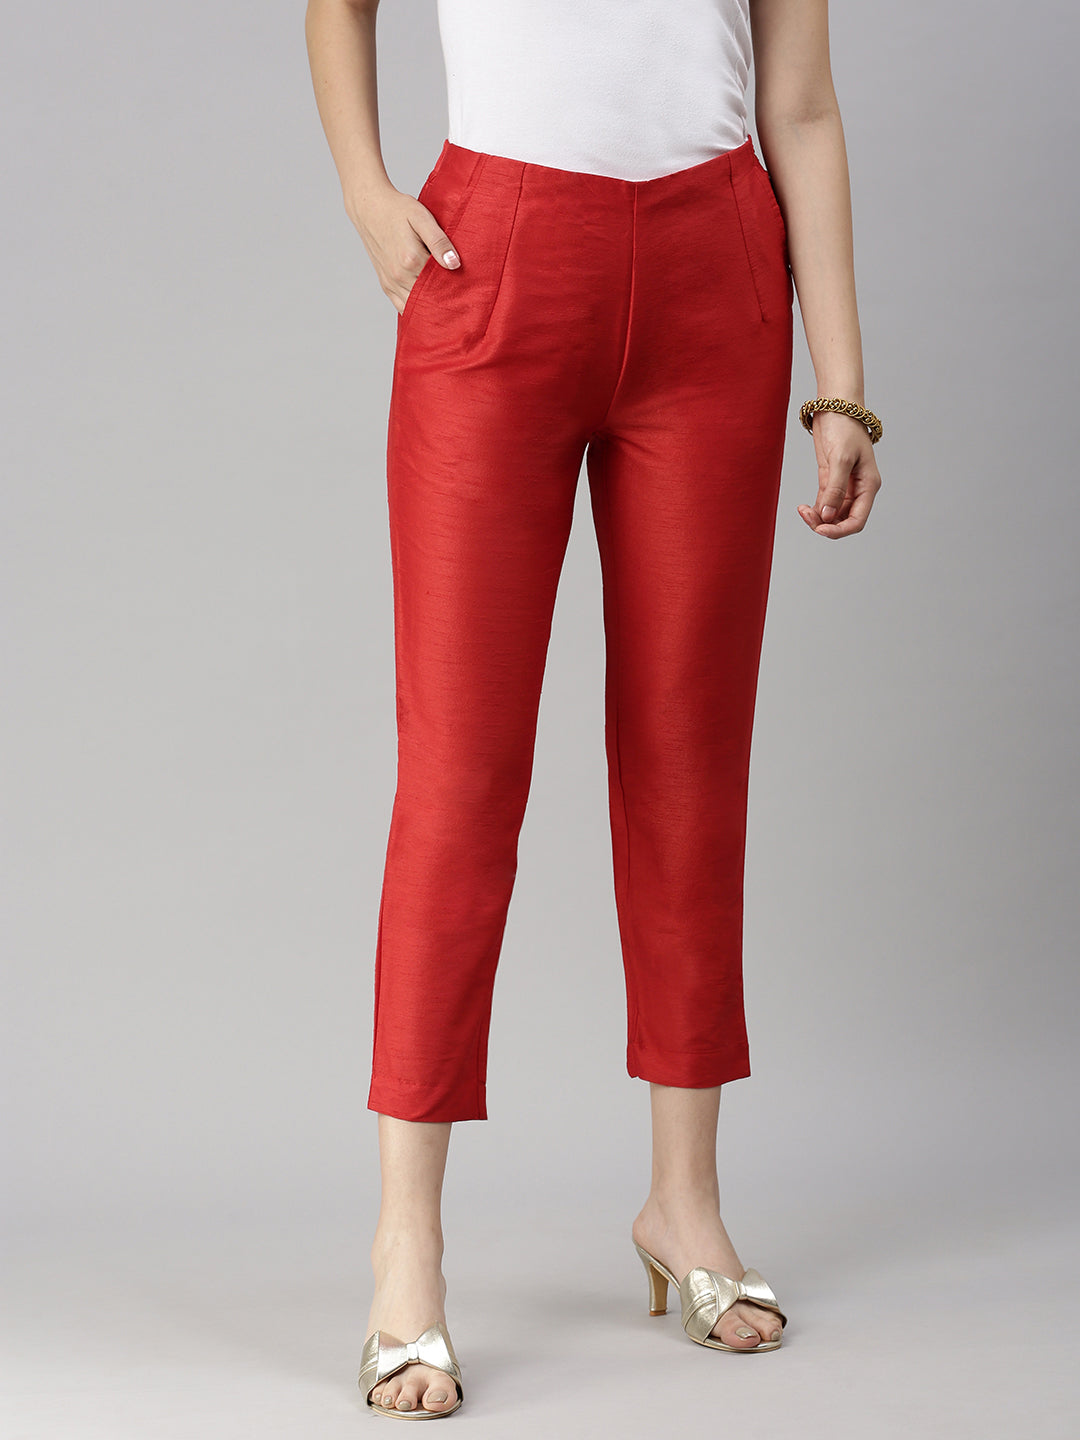 Combo: Beige & Russet Red Cigarette Pants- Set of 2 – Thevasa